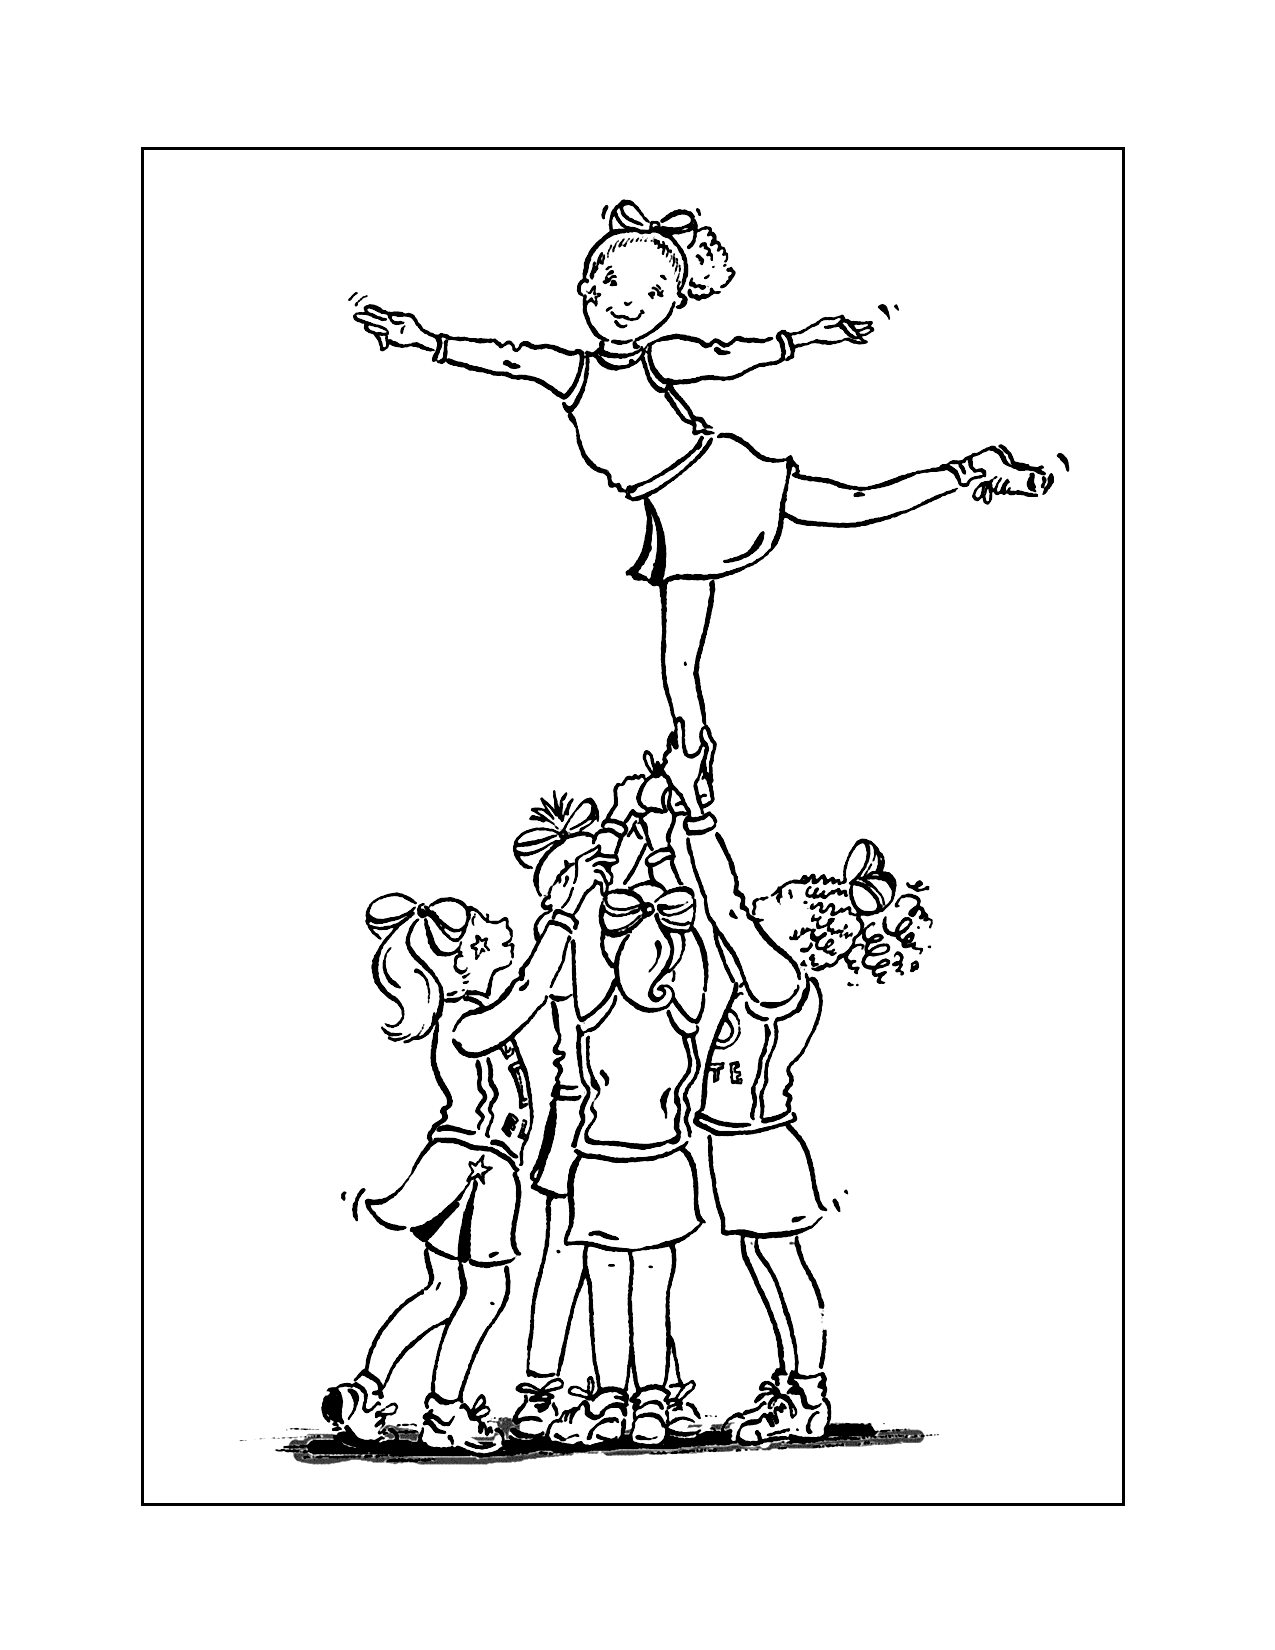 Cheer Flyer Coloring Page